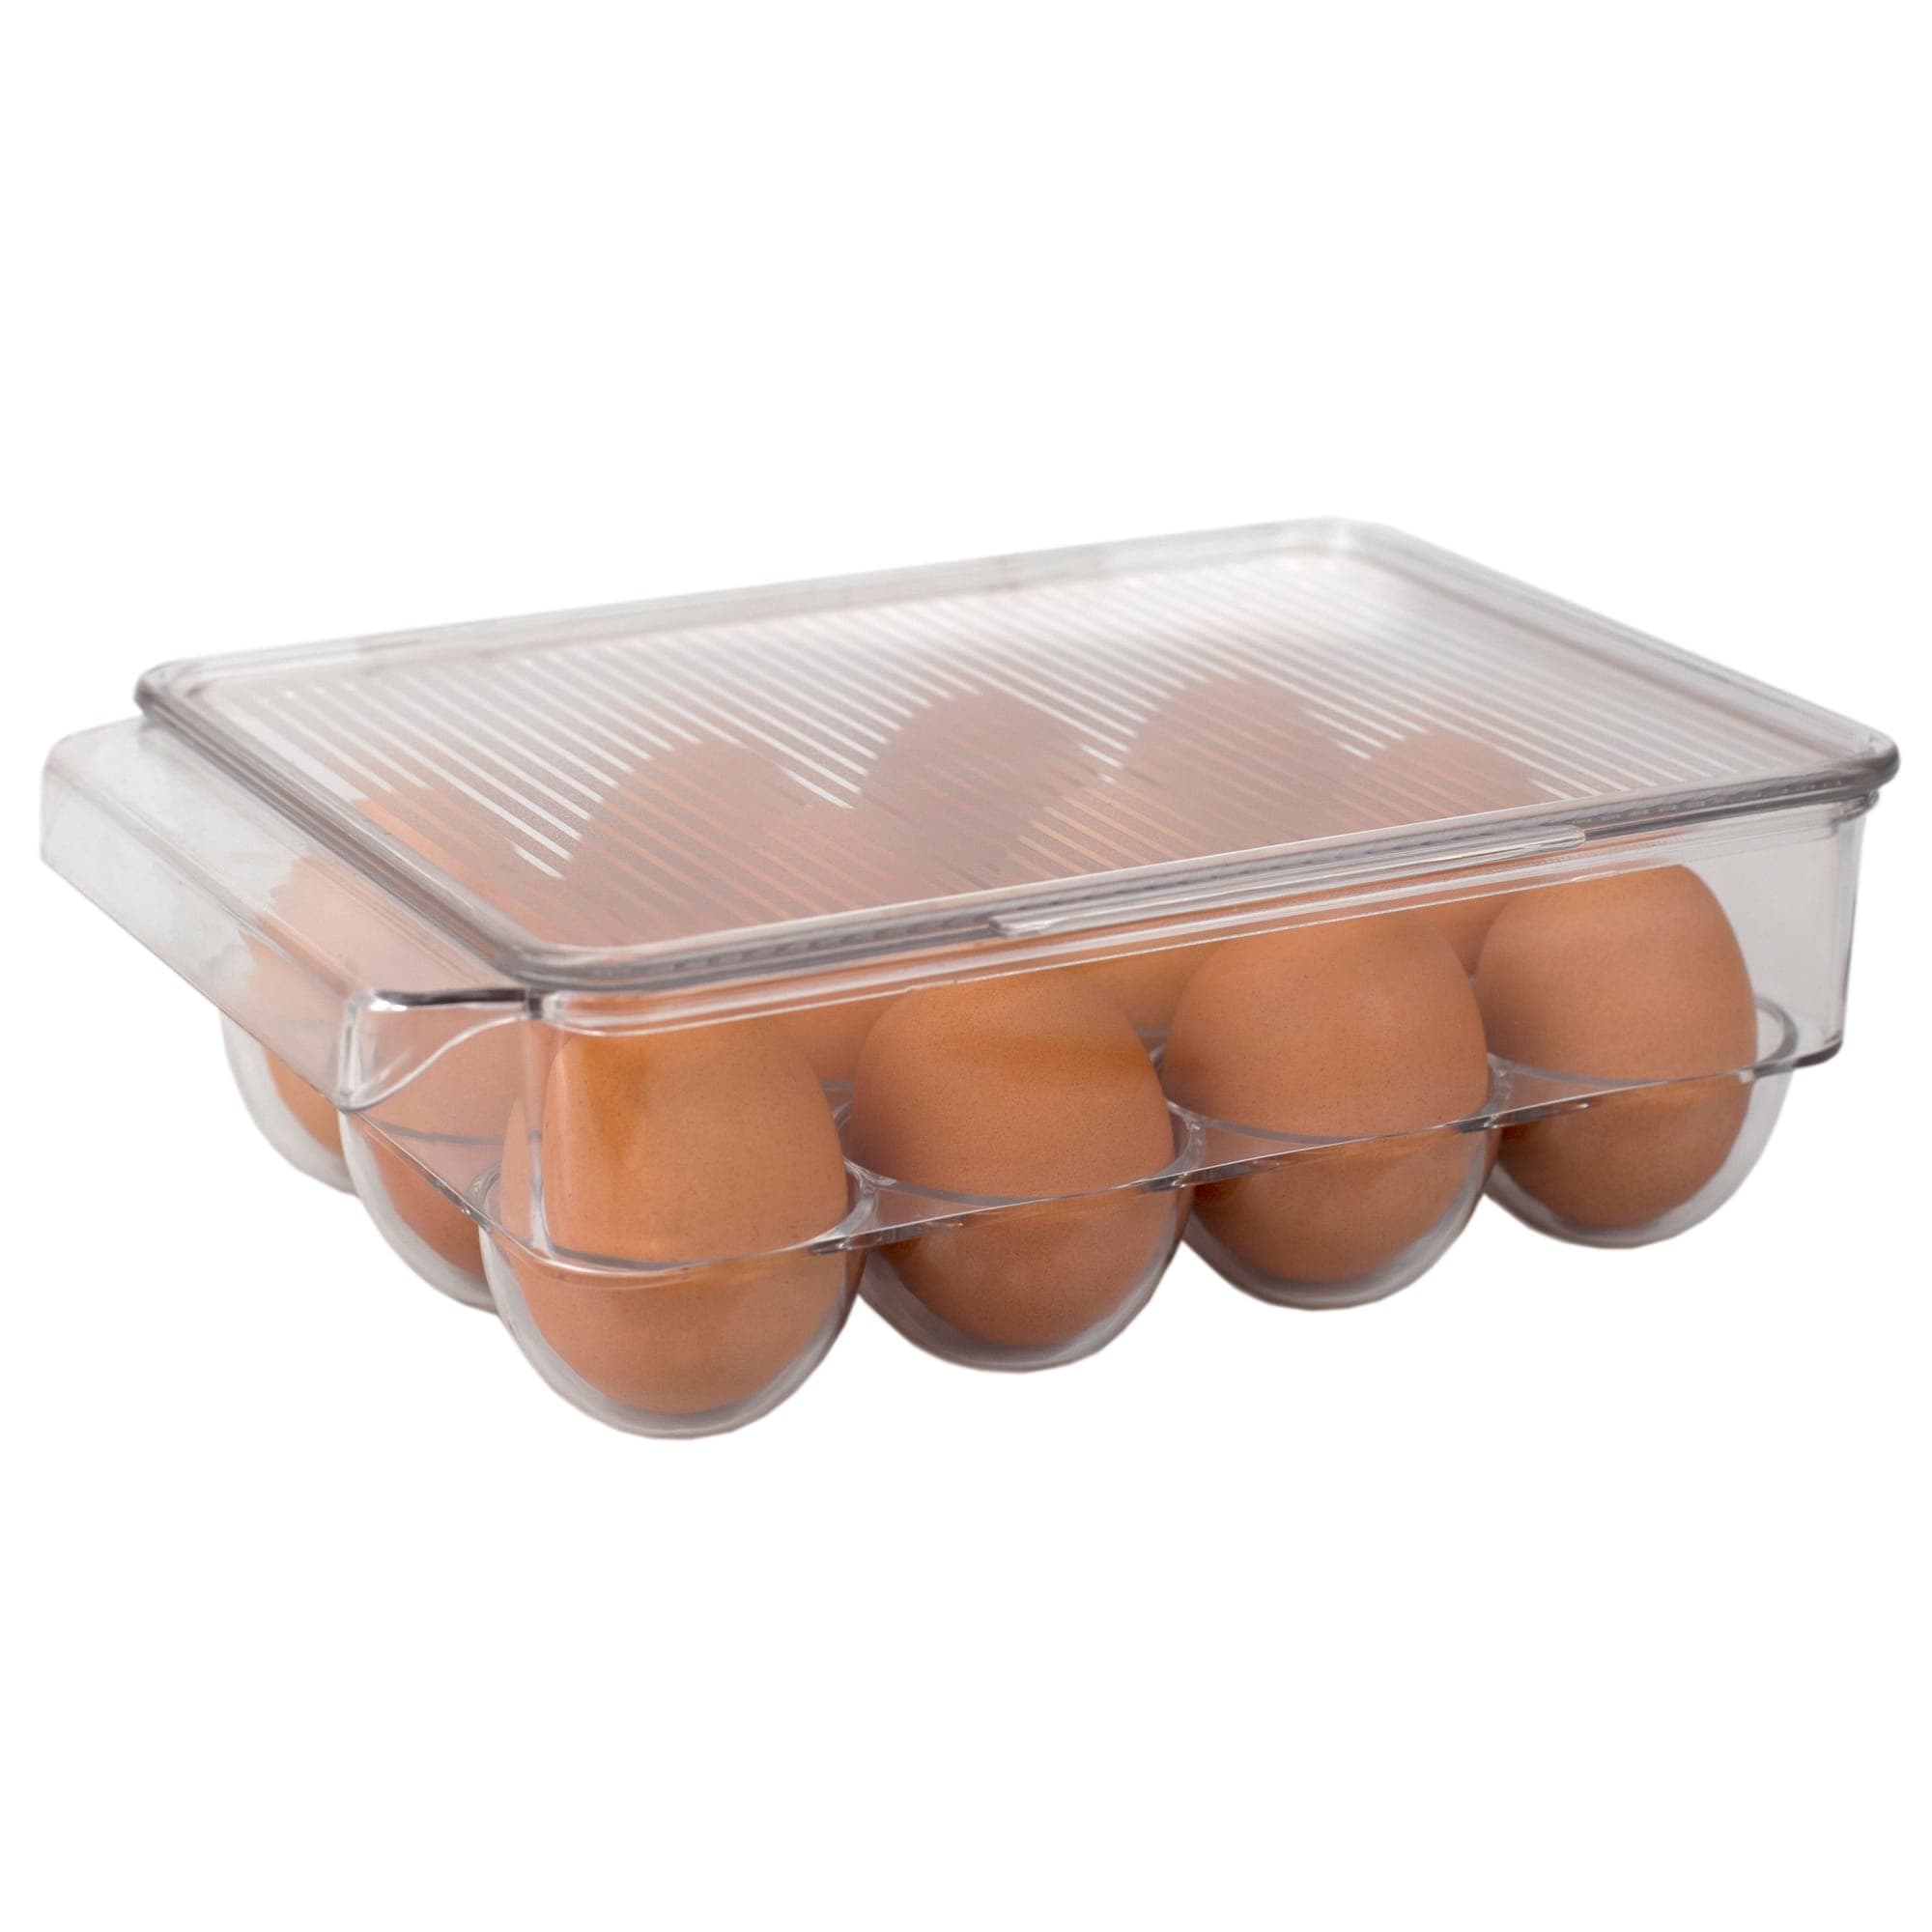 Michael Graves Design Stackable 12 Compartment Plastic Egg Container with Lid, Clear $5.00 EACH, CASE PACK OF 12